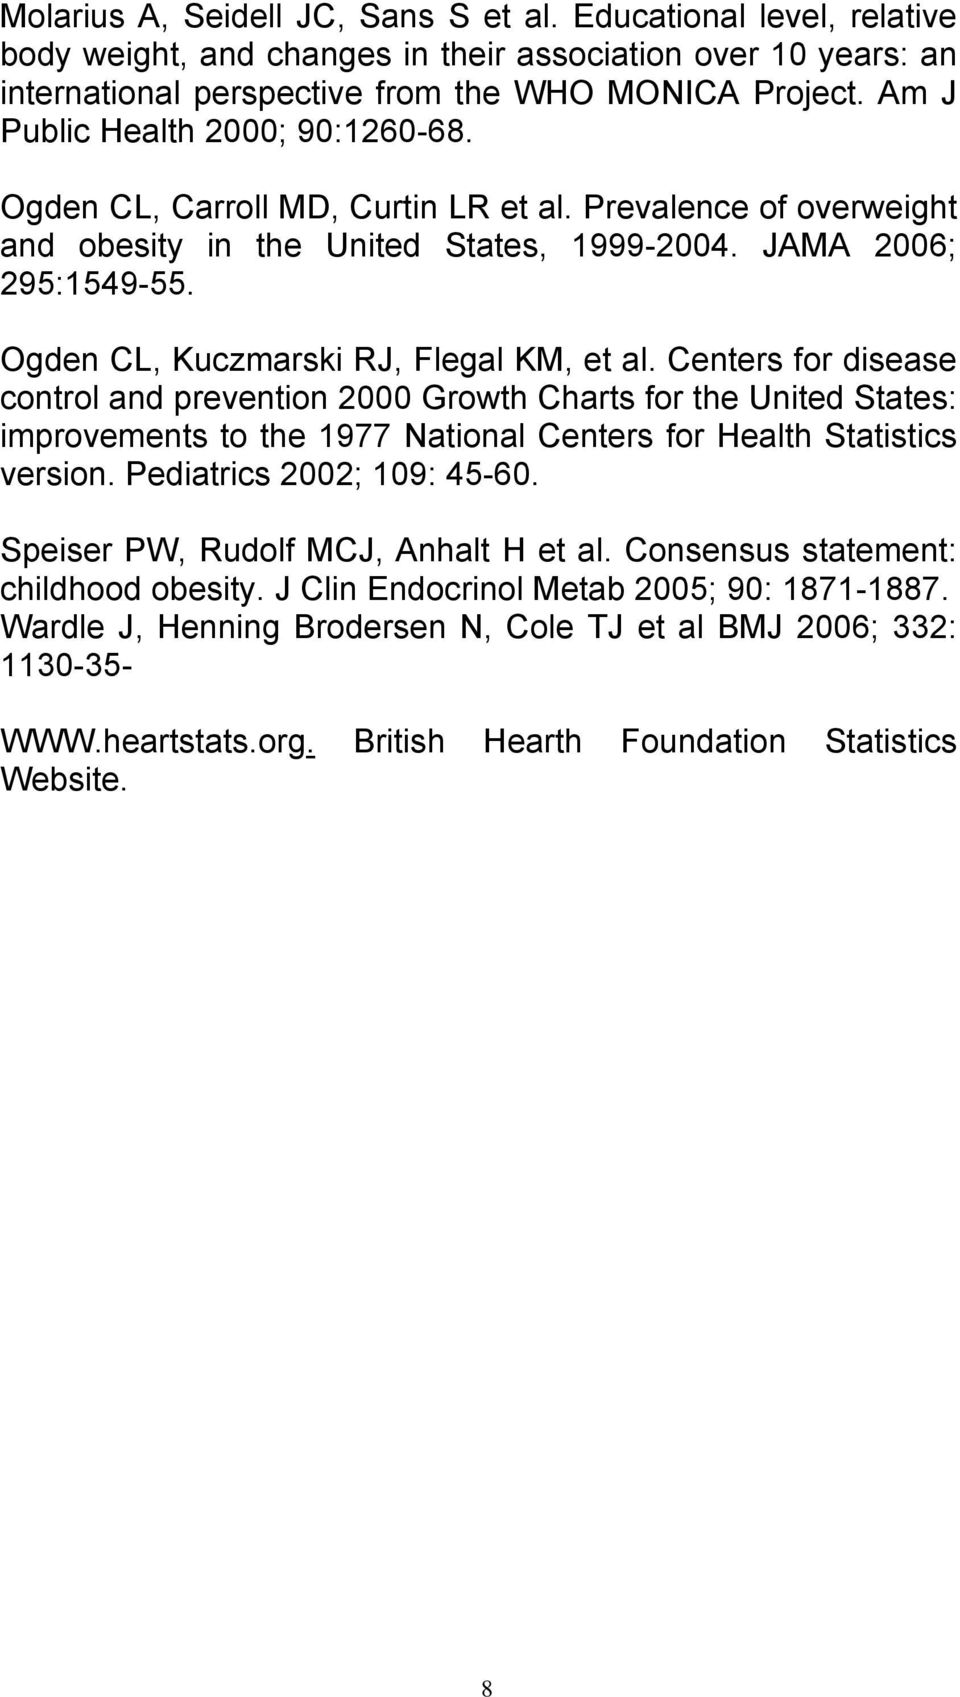 Ogden CL, Kuczmarski RJ, Flegal KM, et al. Centers for disease control and prevention 2000 Growth Charts for the United States: improvements to the 1977 National Centers for Health Statistics version.